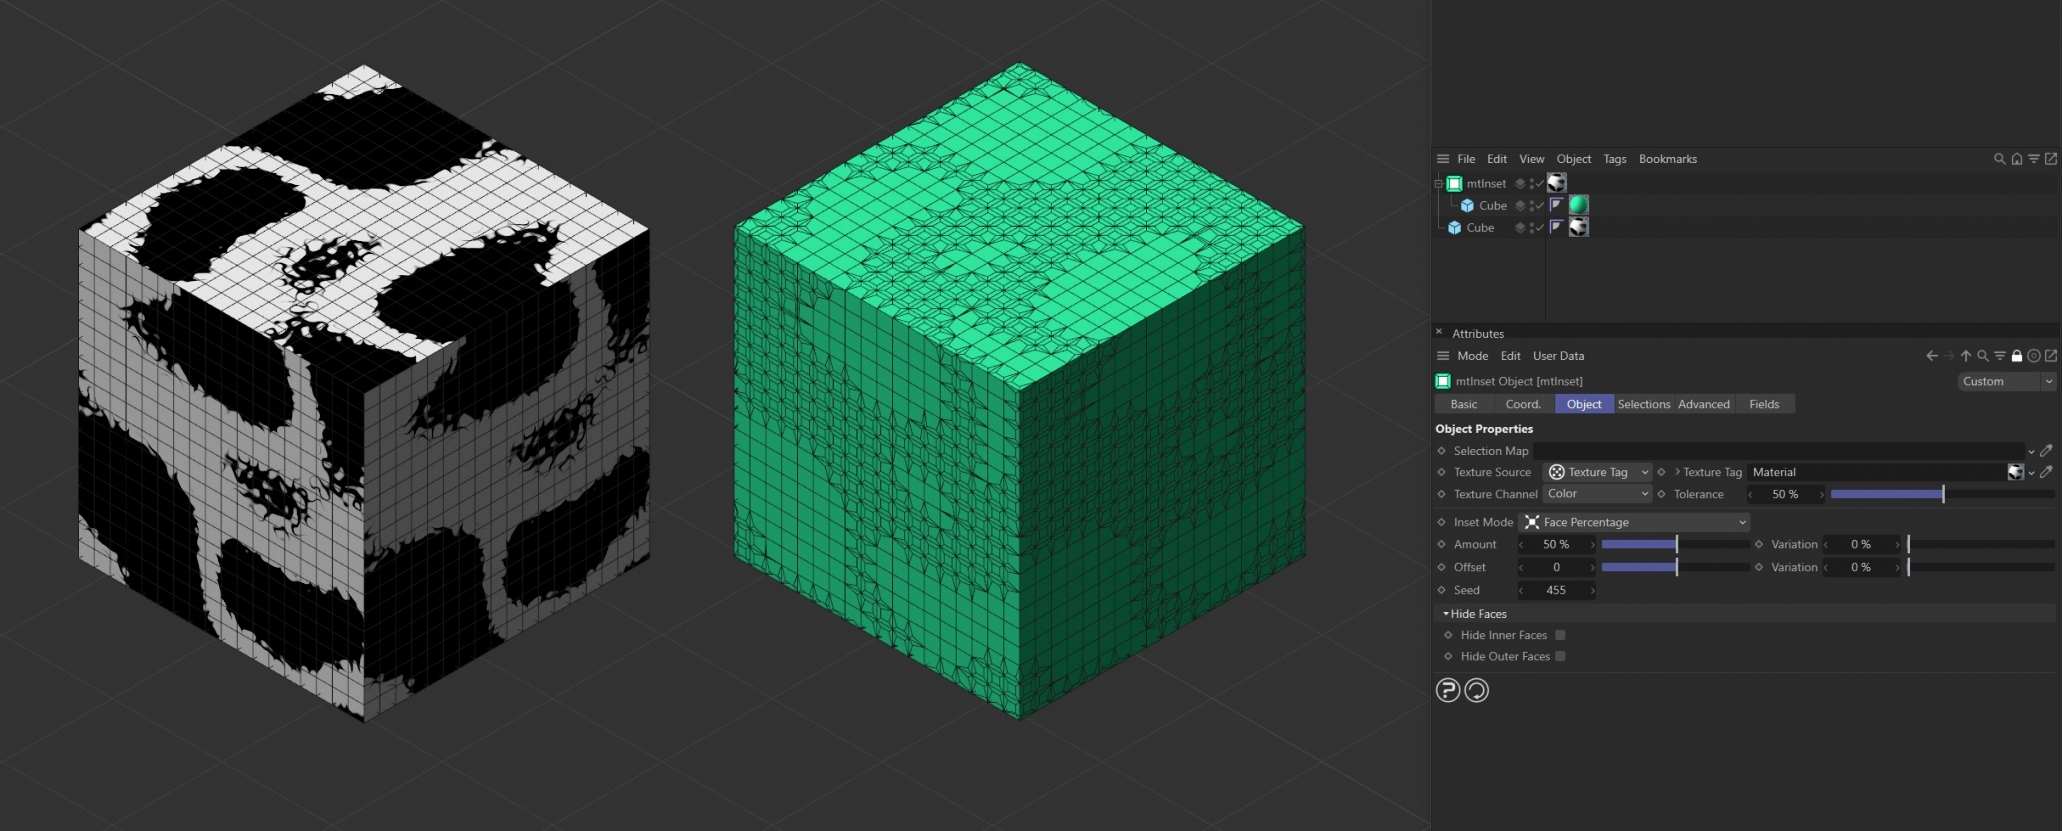 Texture Source set to Texture Tag, with the Noise shader material on the left driving the inset generation on the right-hand Cube.